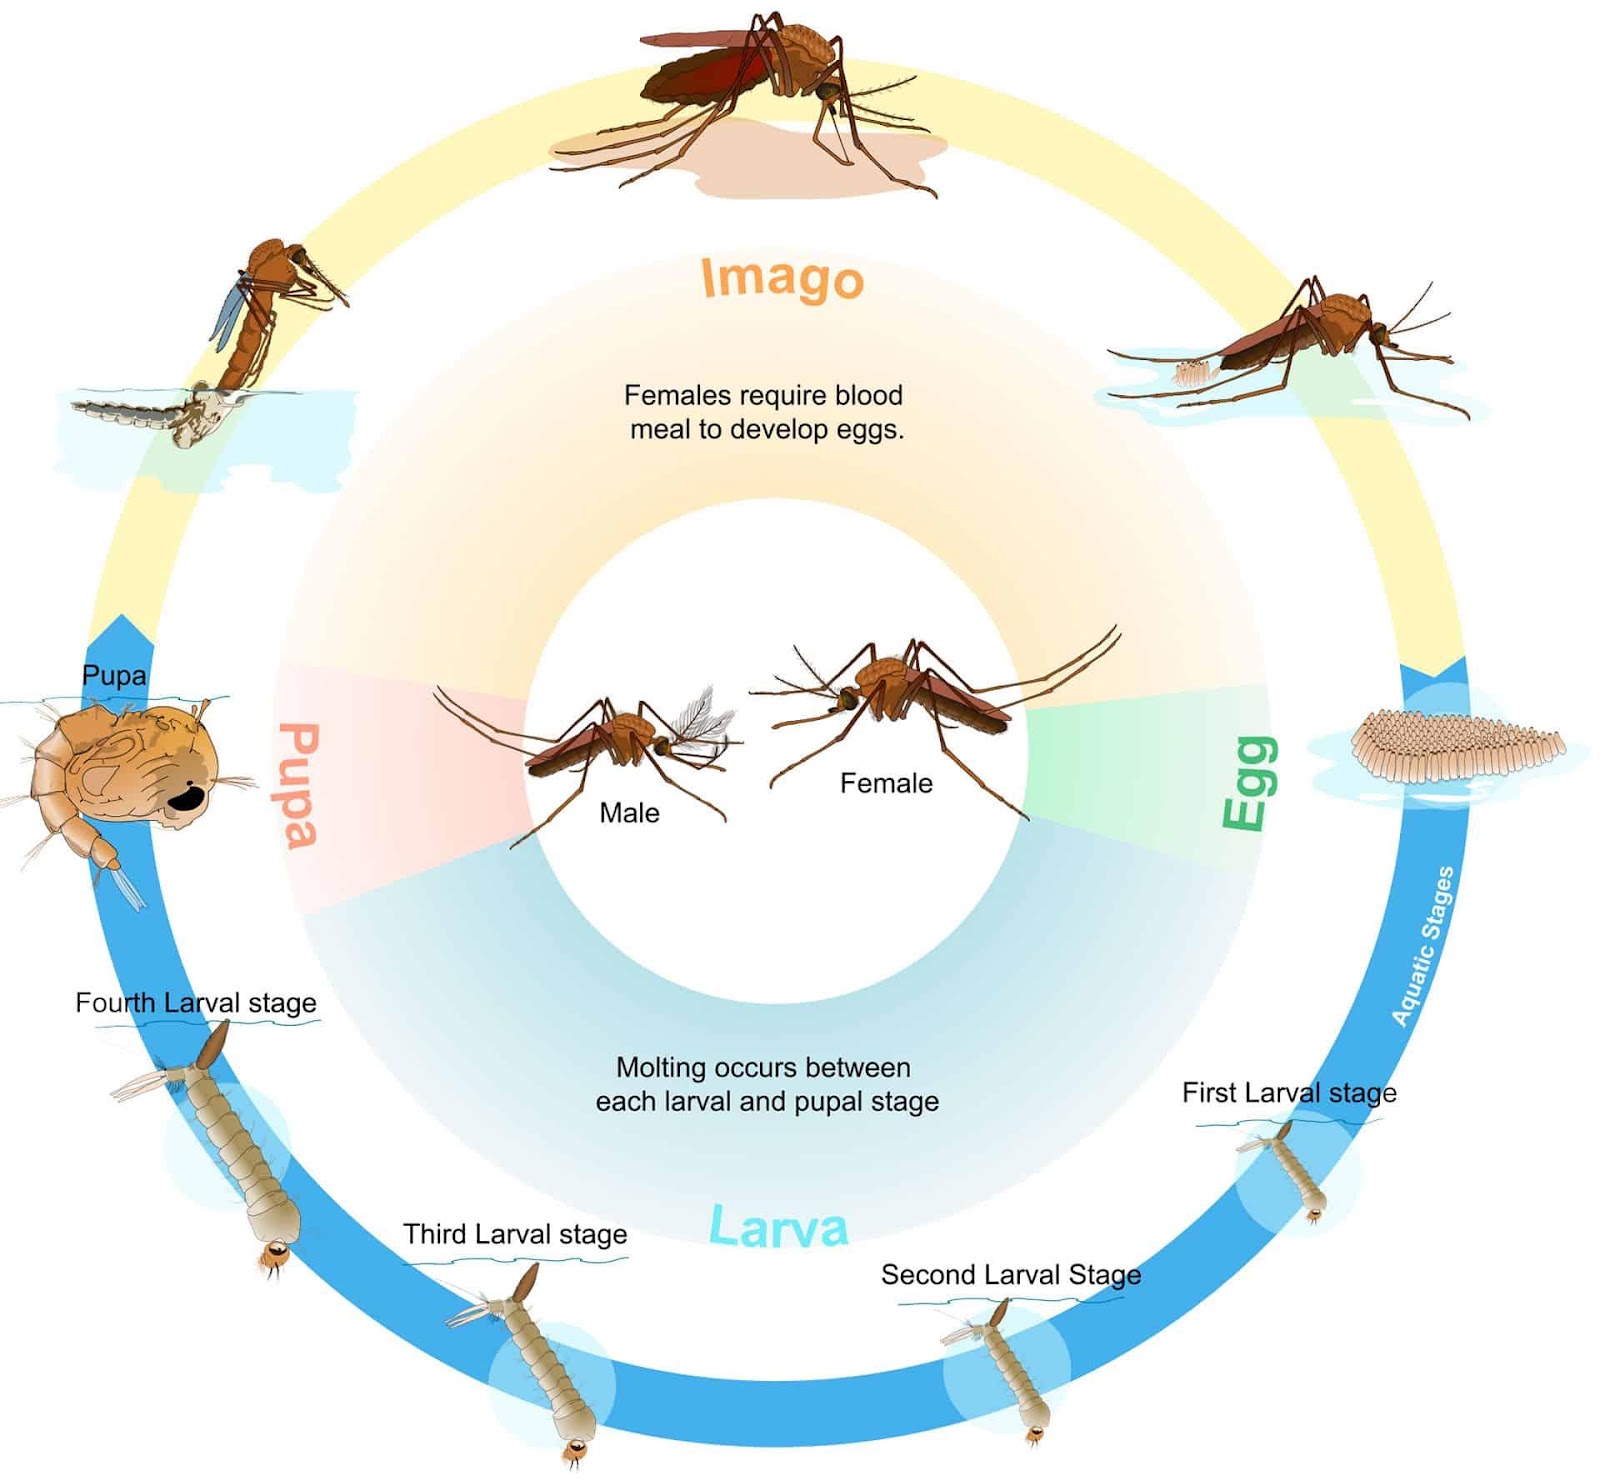 Mosquito Life Cycle: How Long Does a Mosquito Live?